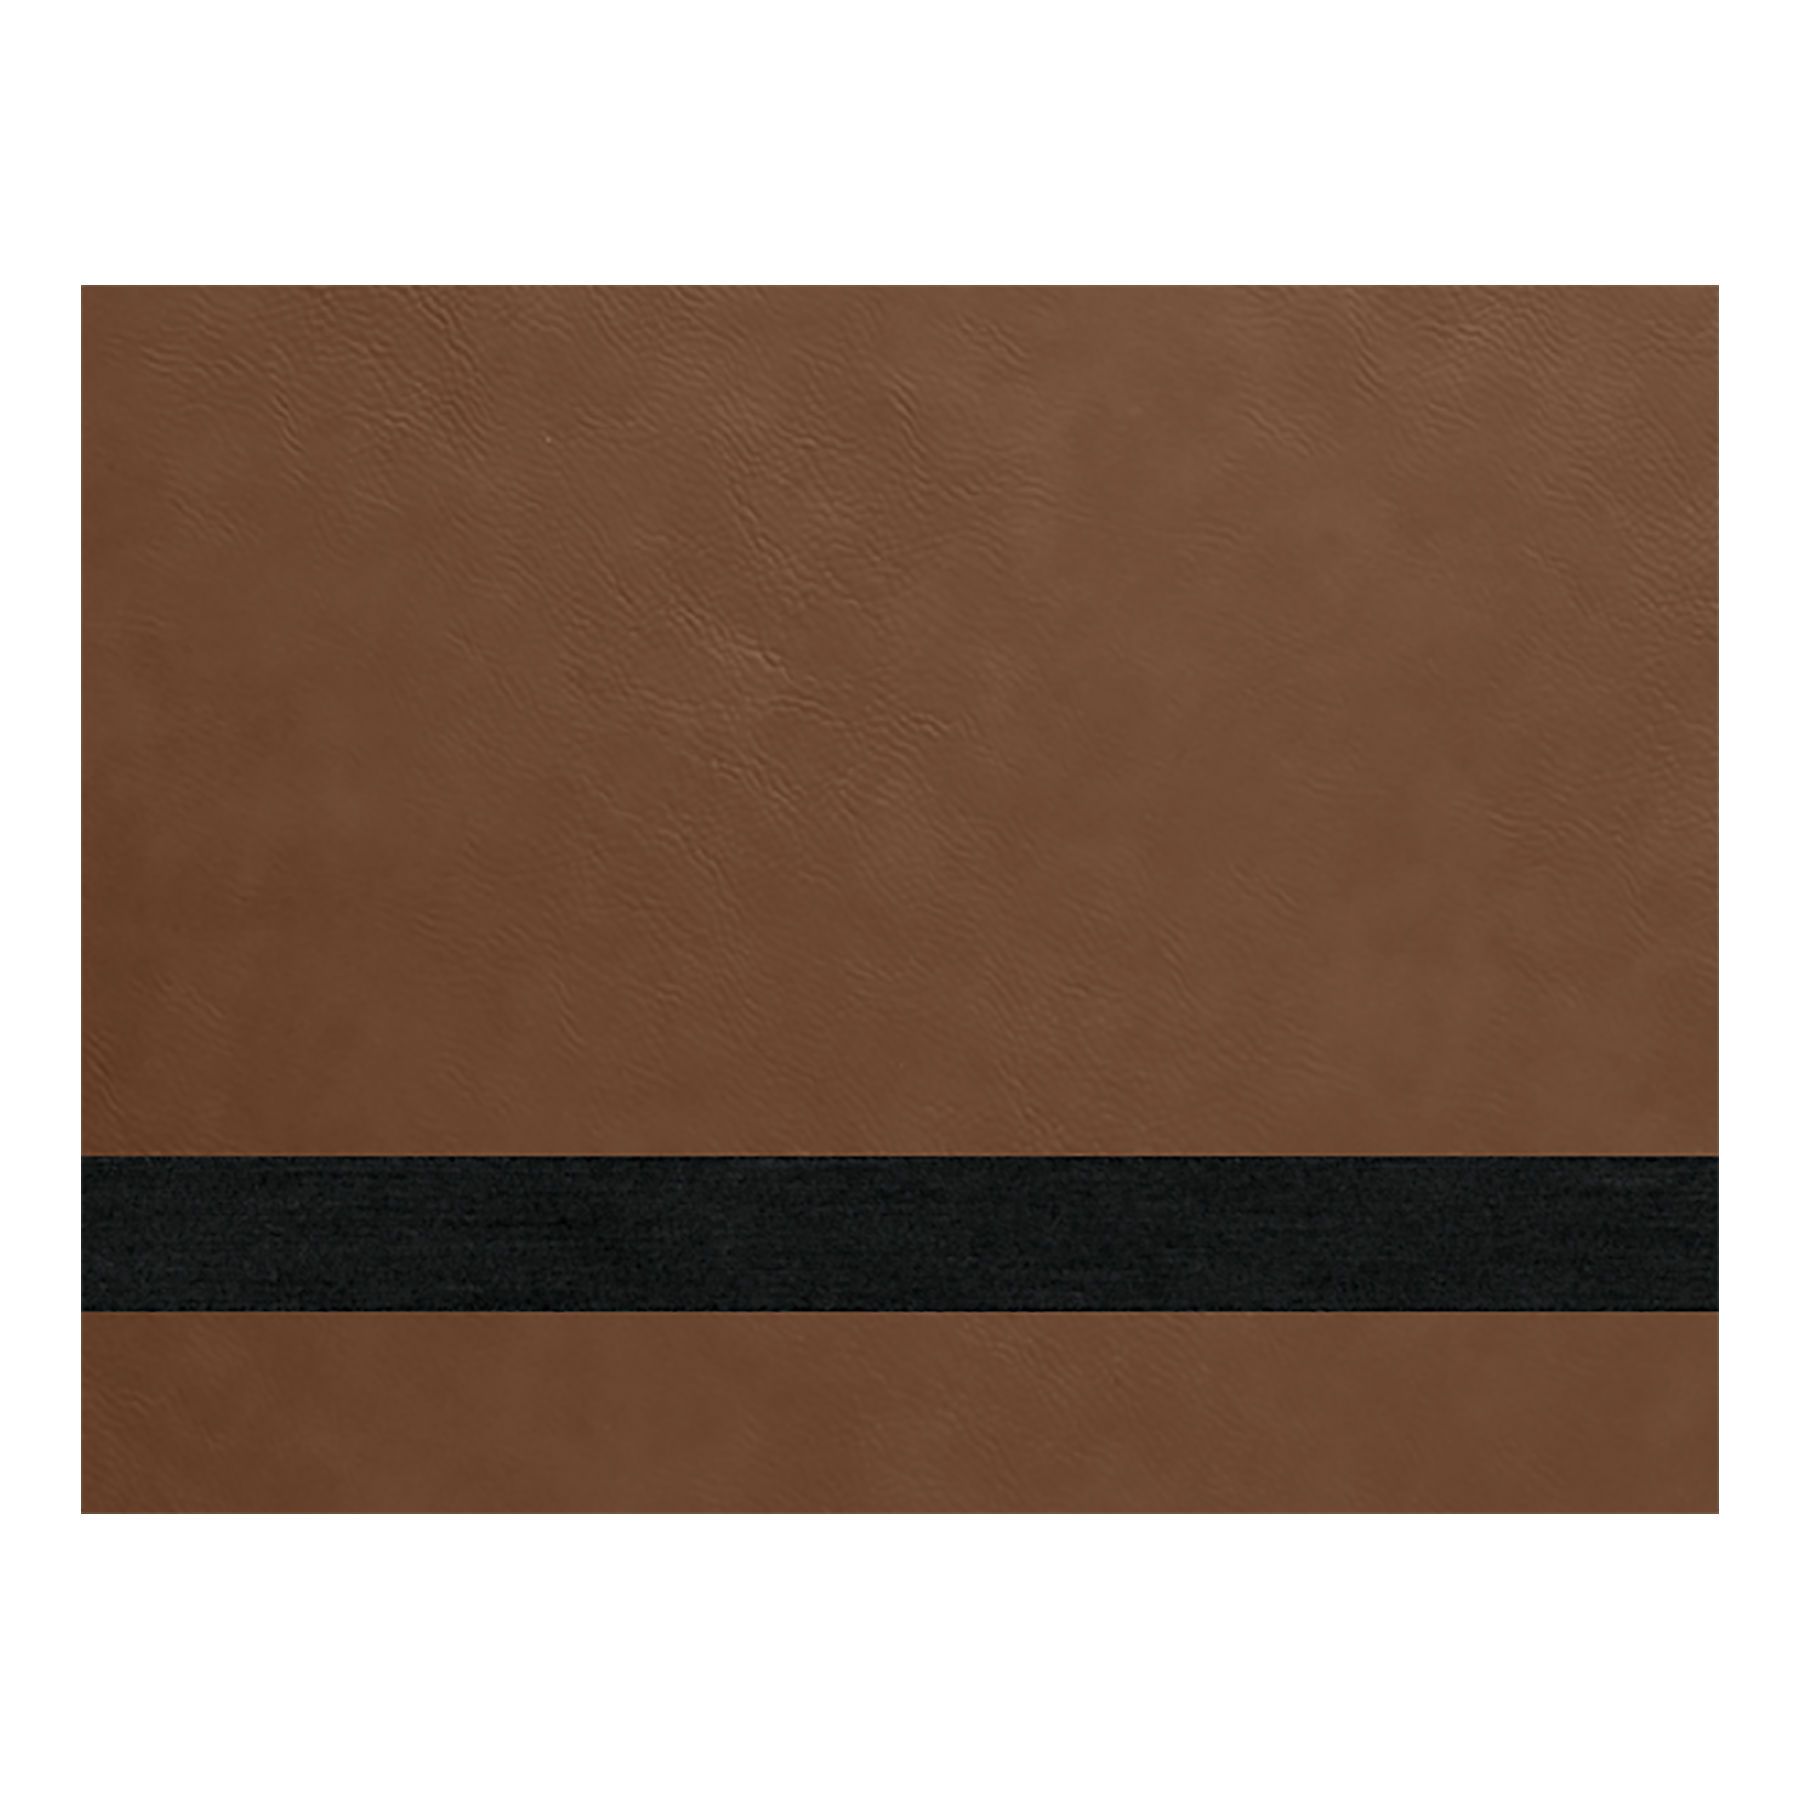 PRE-ORDER! Full Size Laserable Leatherette Sheet Stock, Omtech Laser Engravers (Available Jan. 2022) Engraving Supplies Craftworks NW 24x16 (24" x 16") Dark Brown/Black 